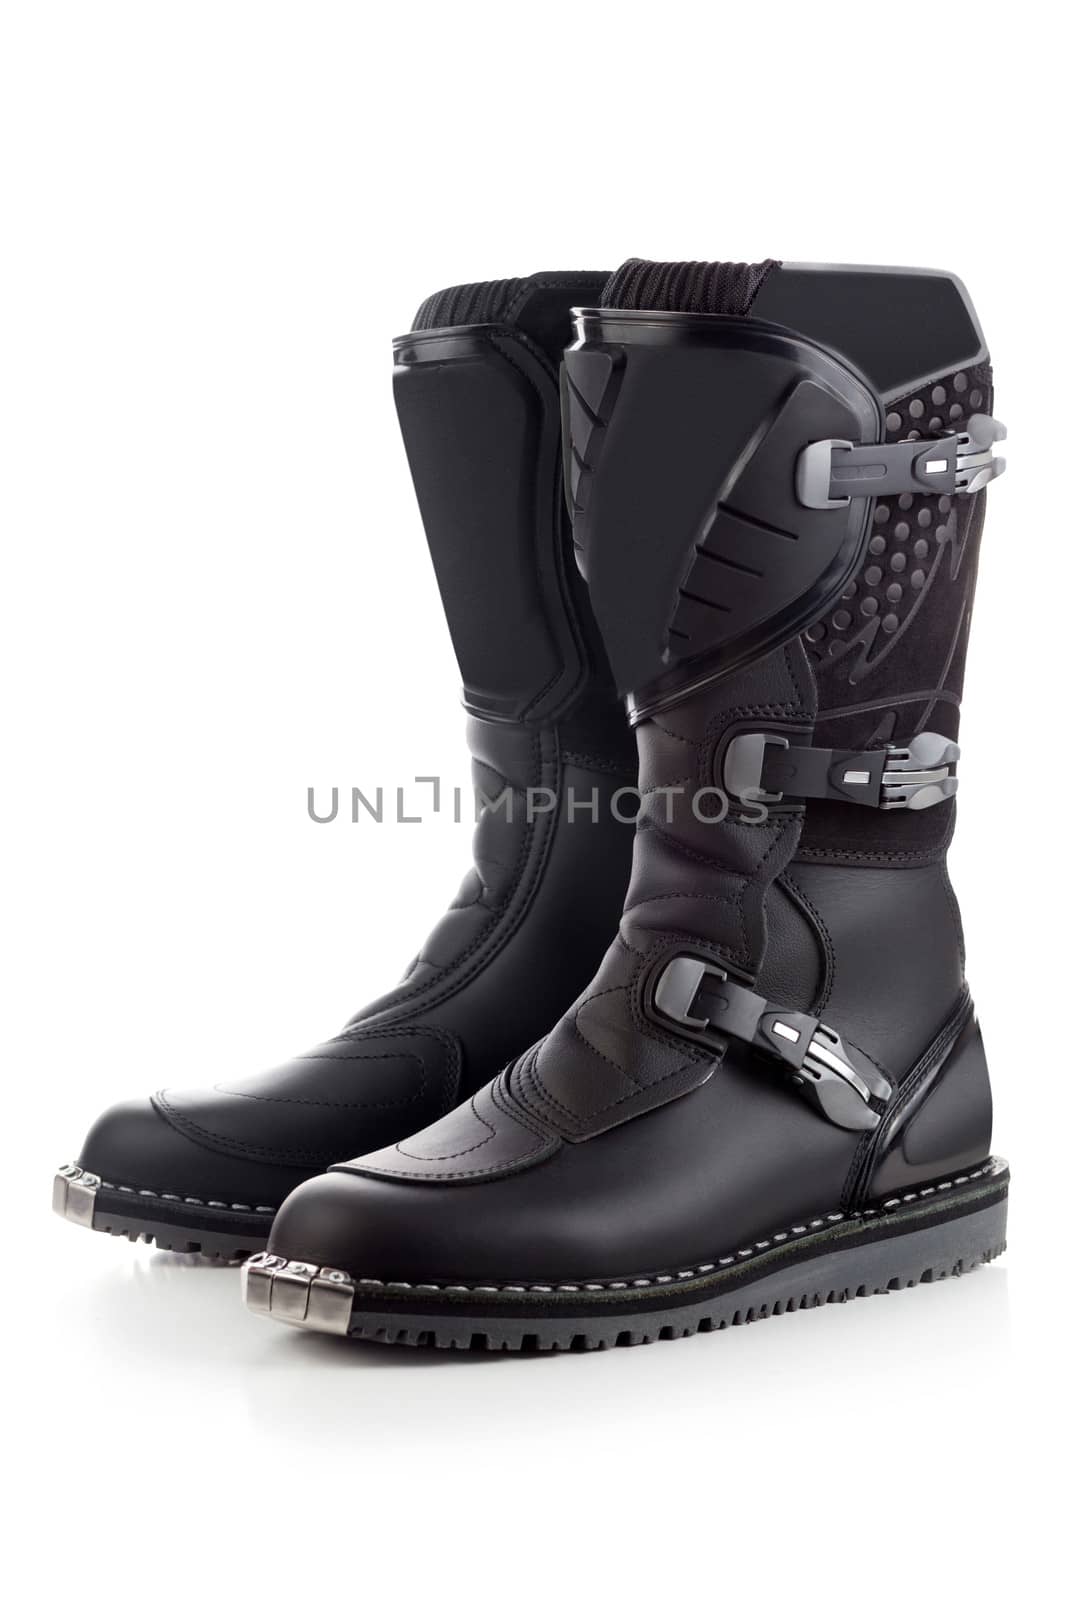 Biker boots for motocross isolated by Kor